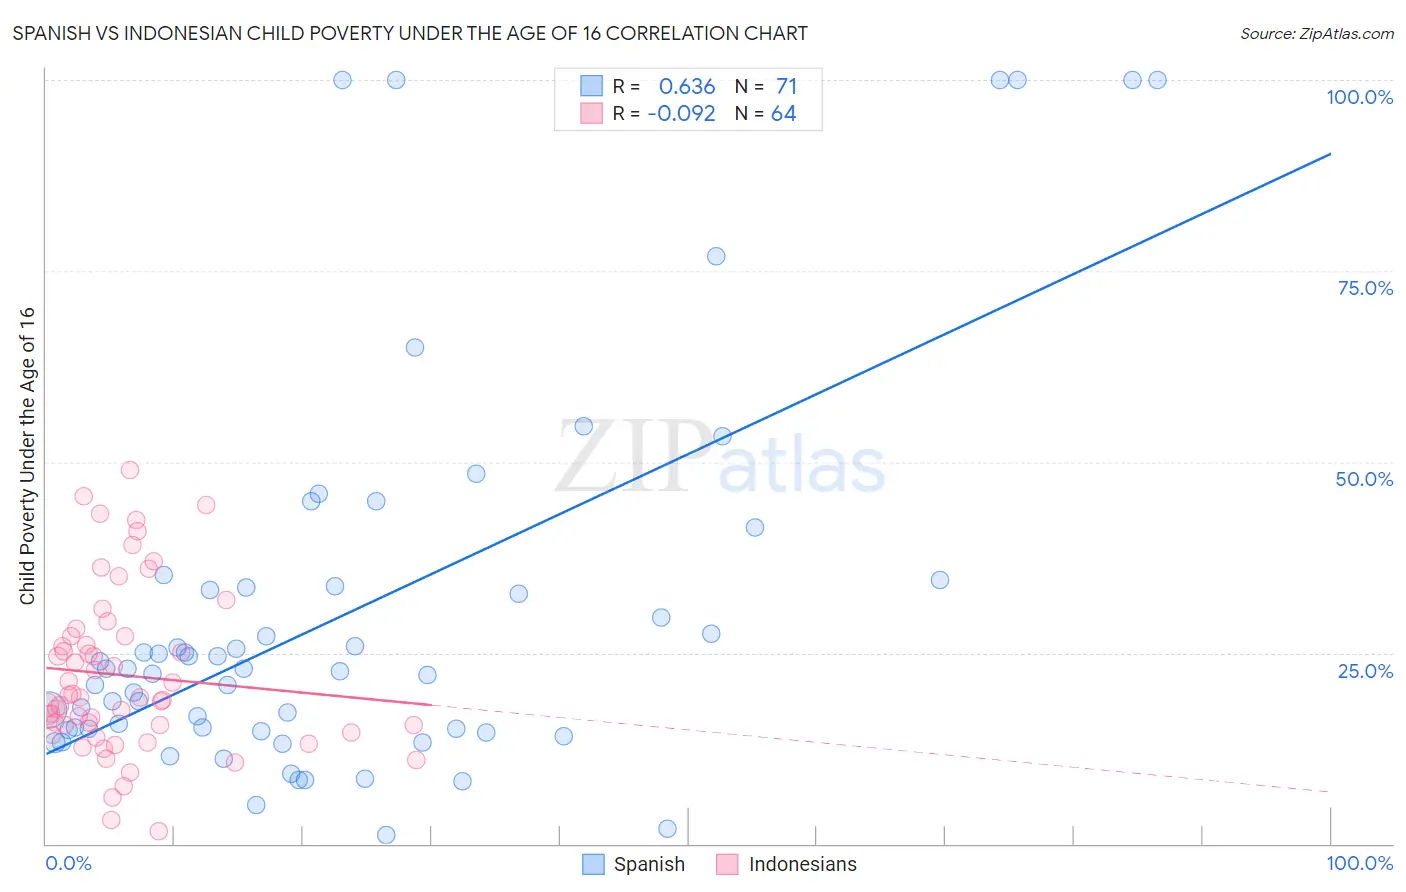 Spanish vs Indonesian Child Poverty Under the Age of 16